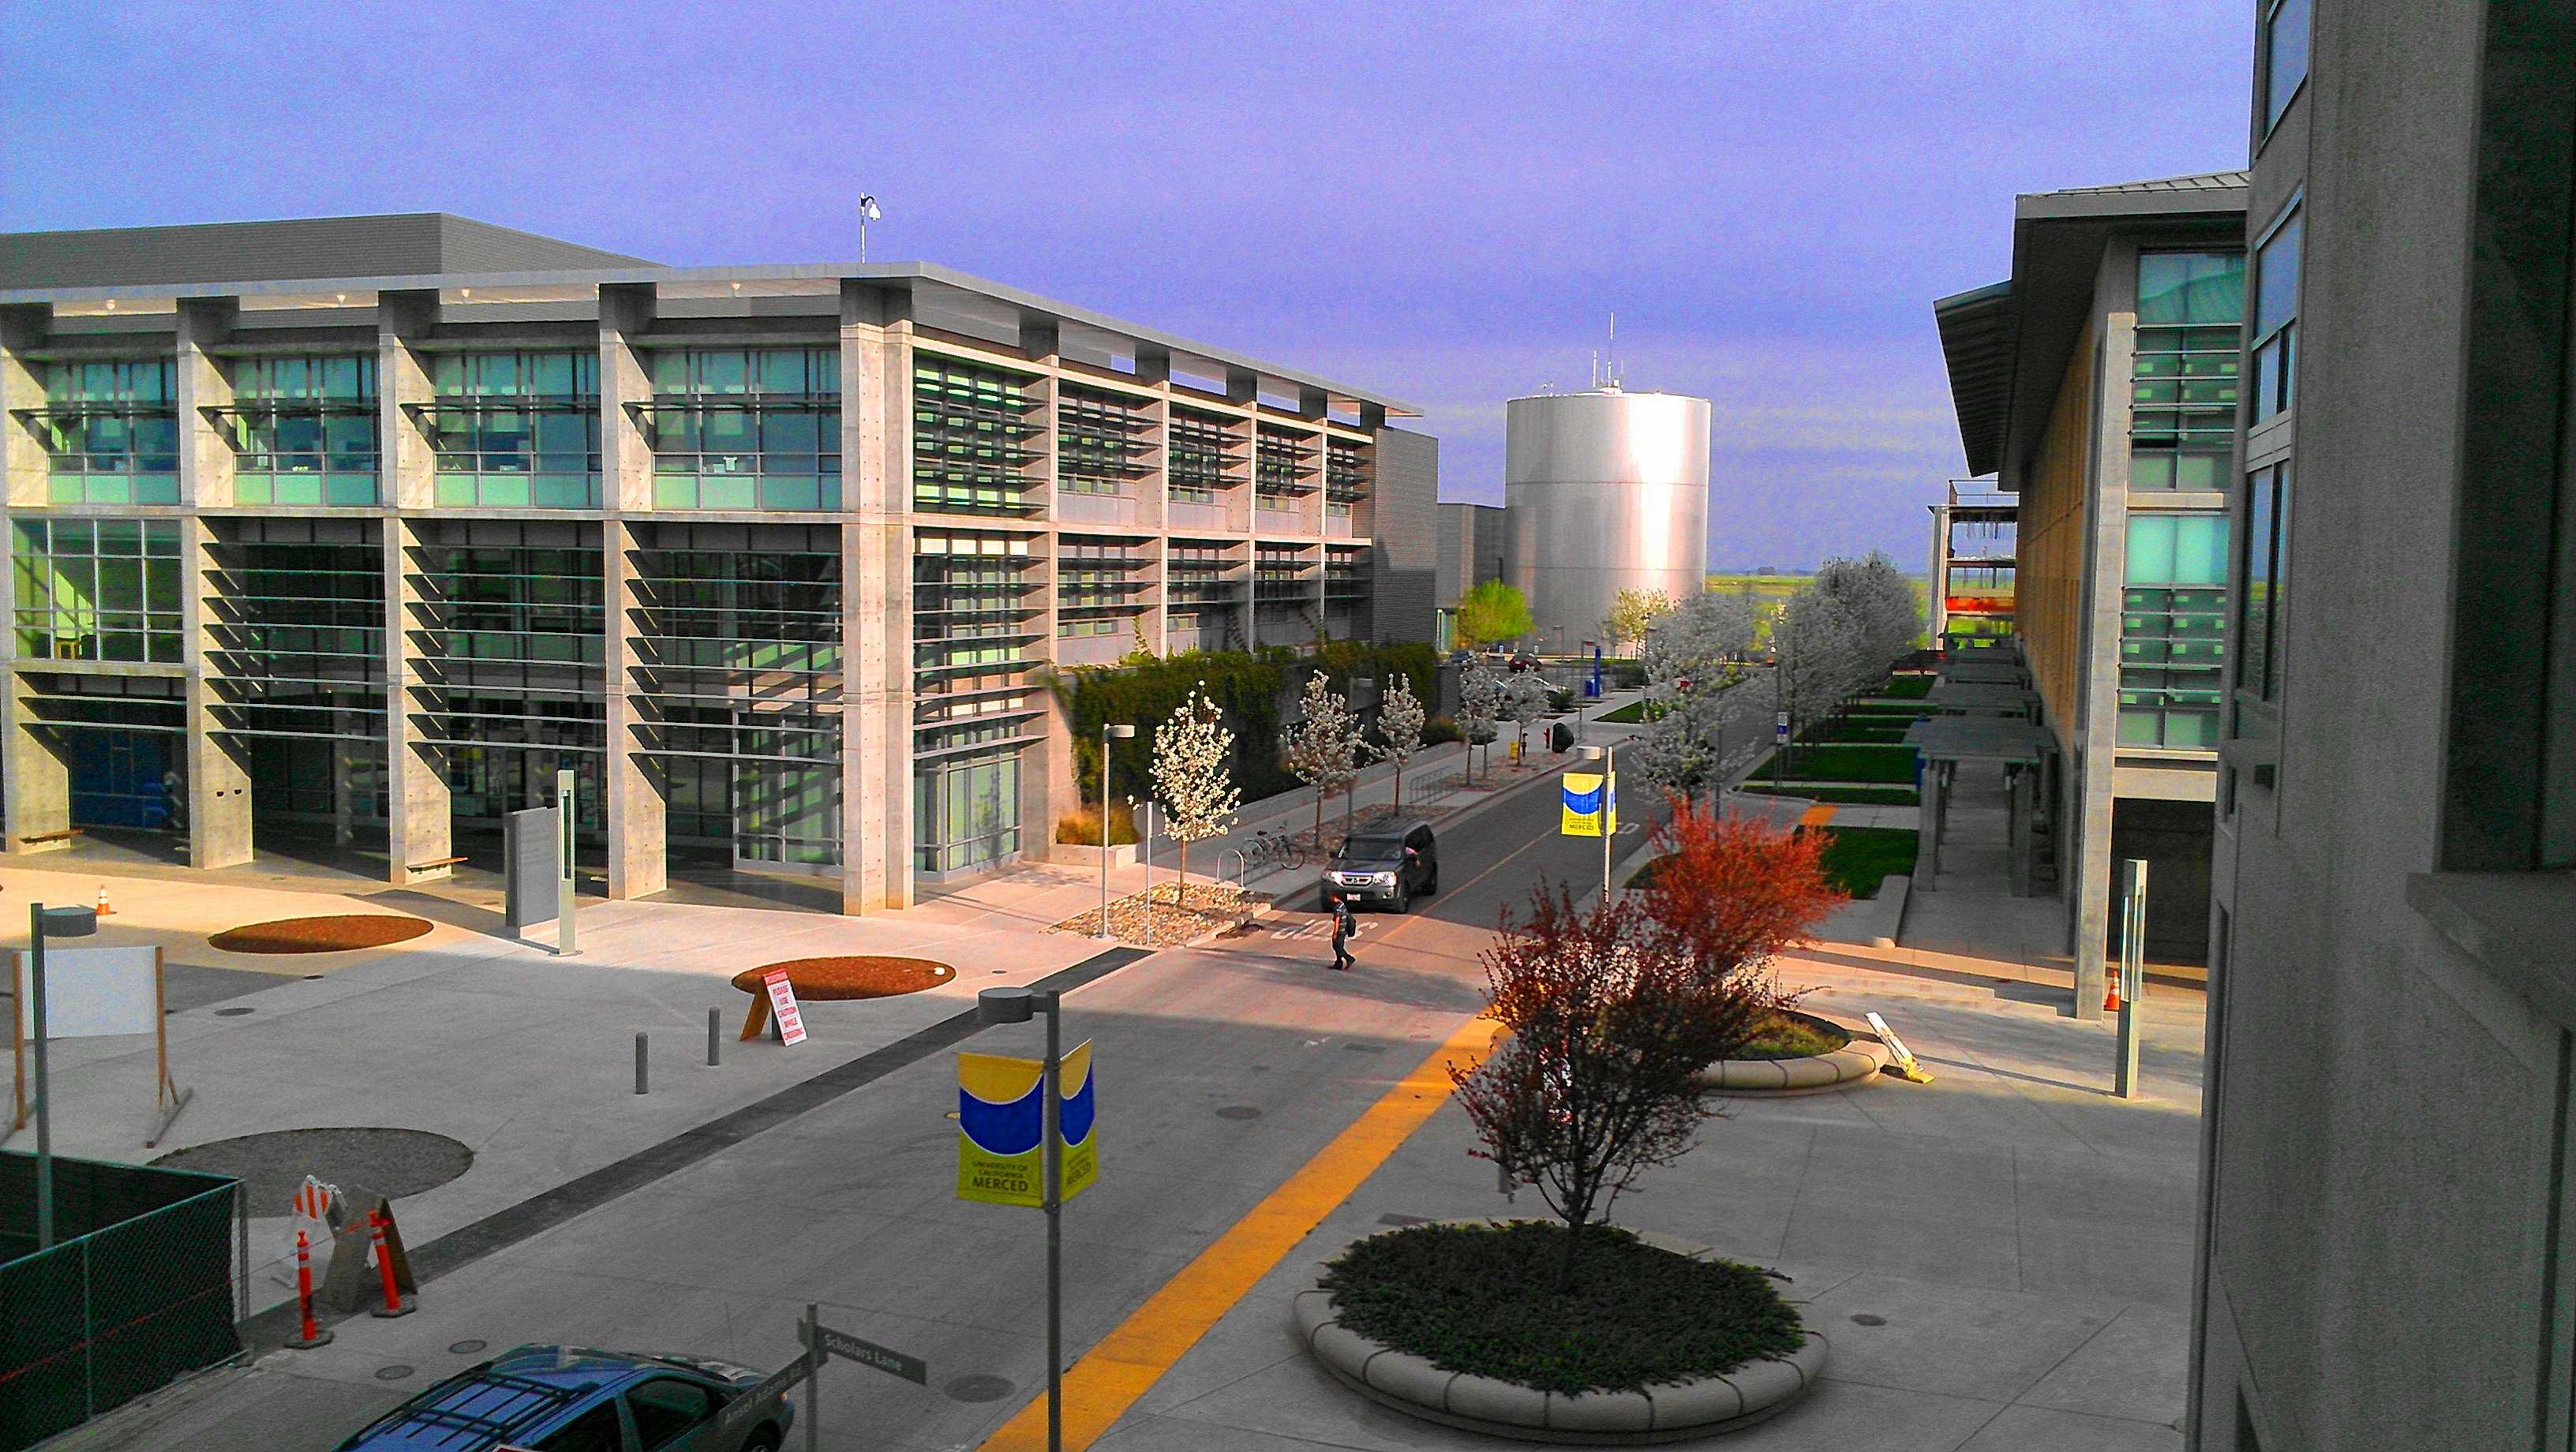 UC Merced Acceptance Rate